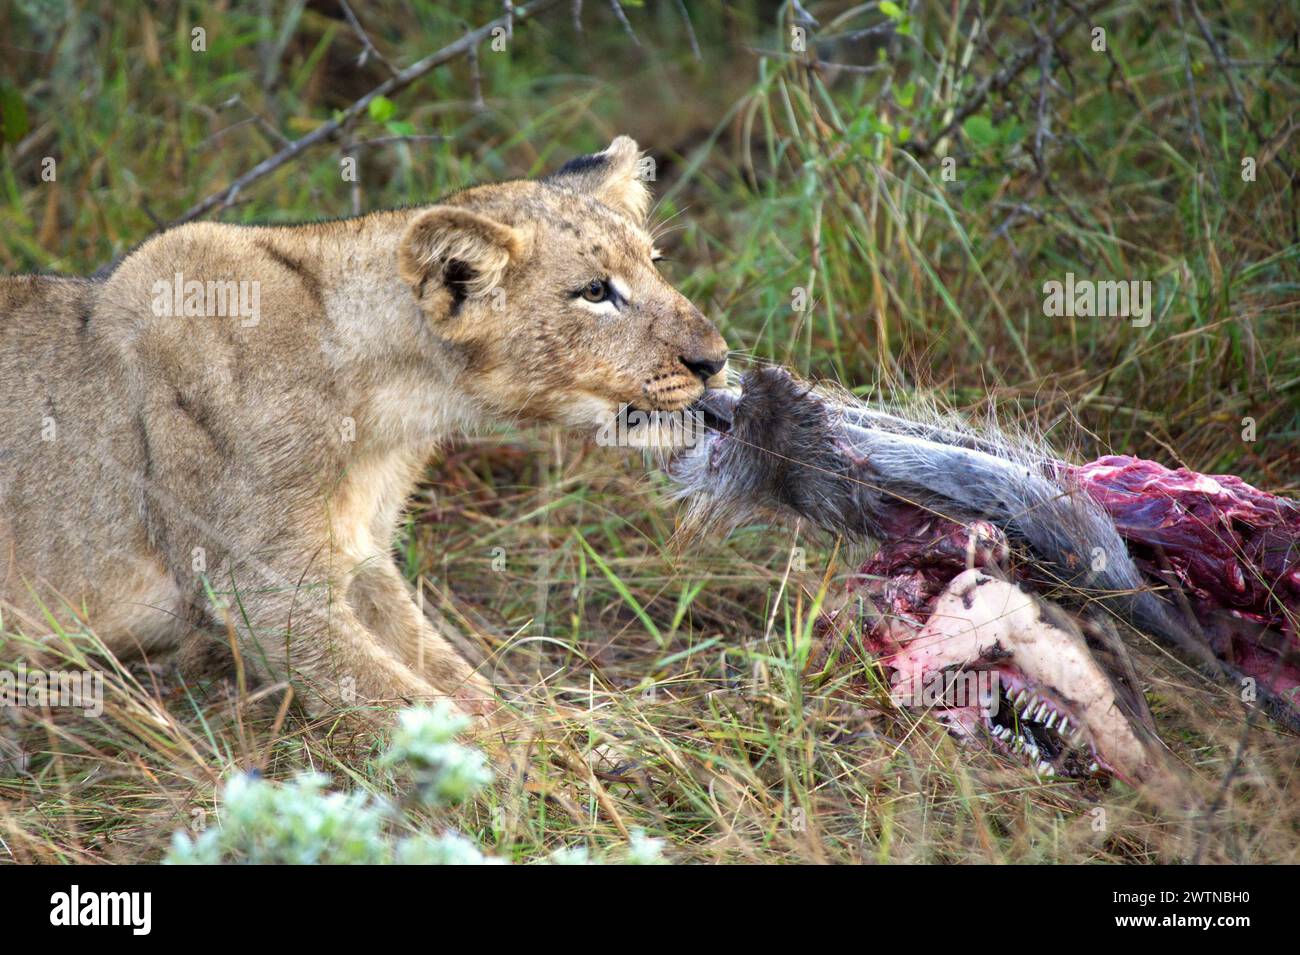 A Lion eating a kill as seen while on Safari in Karongwe Game Reserve, South Africa Stock Photo